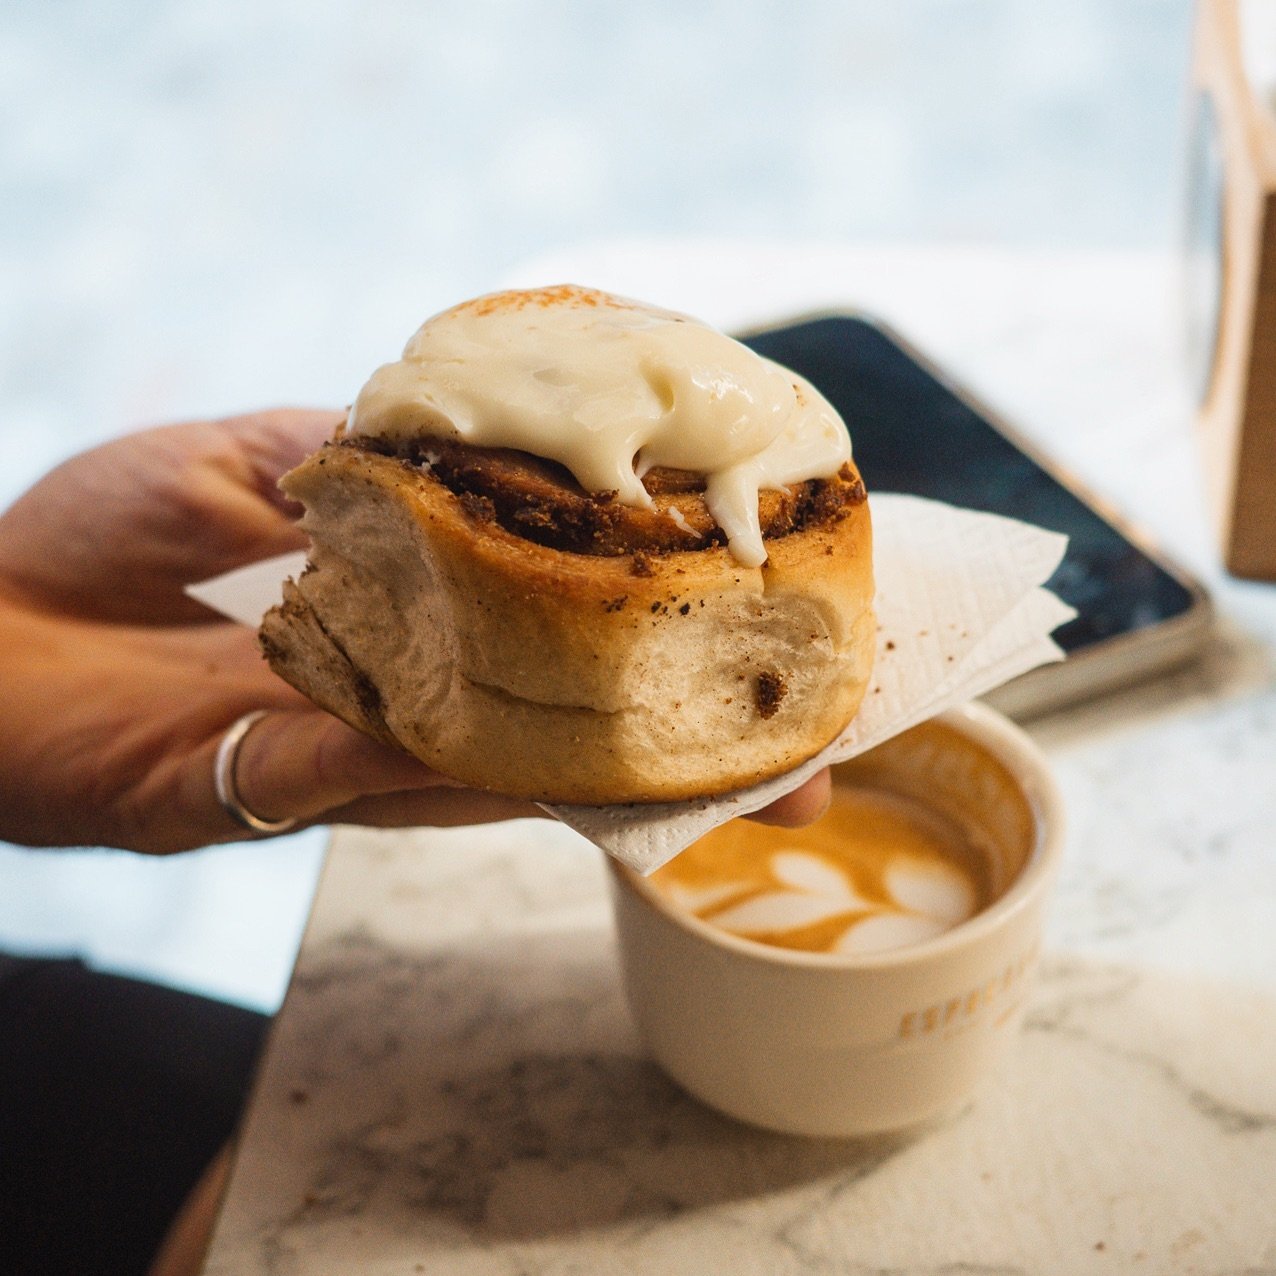 Our signature baked treat.

Brought in fresh every morning, topped with cream cheese icing and warmed up (always say yes to your buns getting warmed up) this is the ying to the yang of your coffee experience 🤩
.
.
.

.

espresso #espressomafia #espr